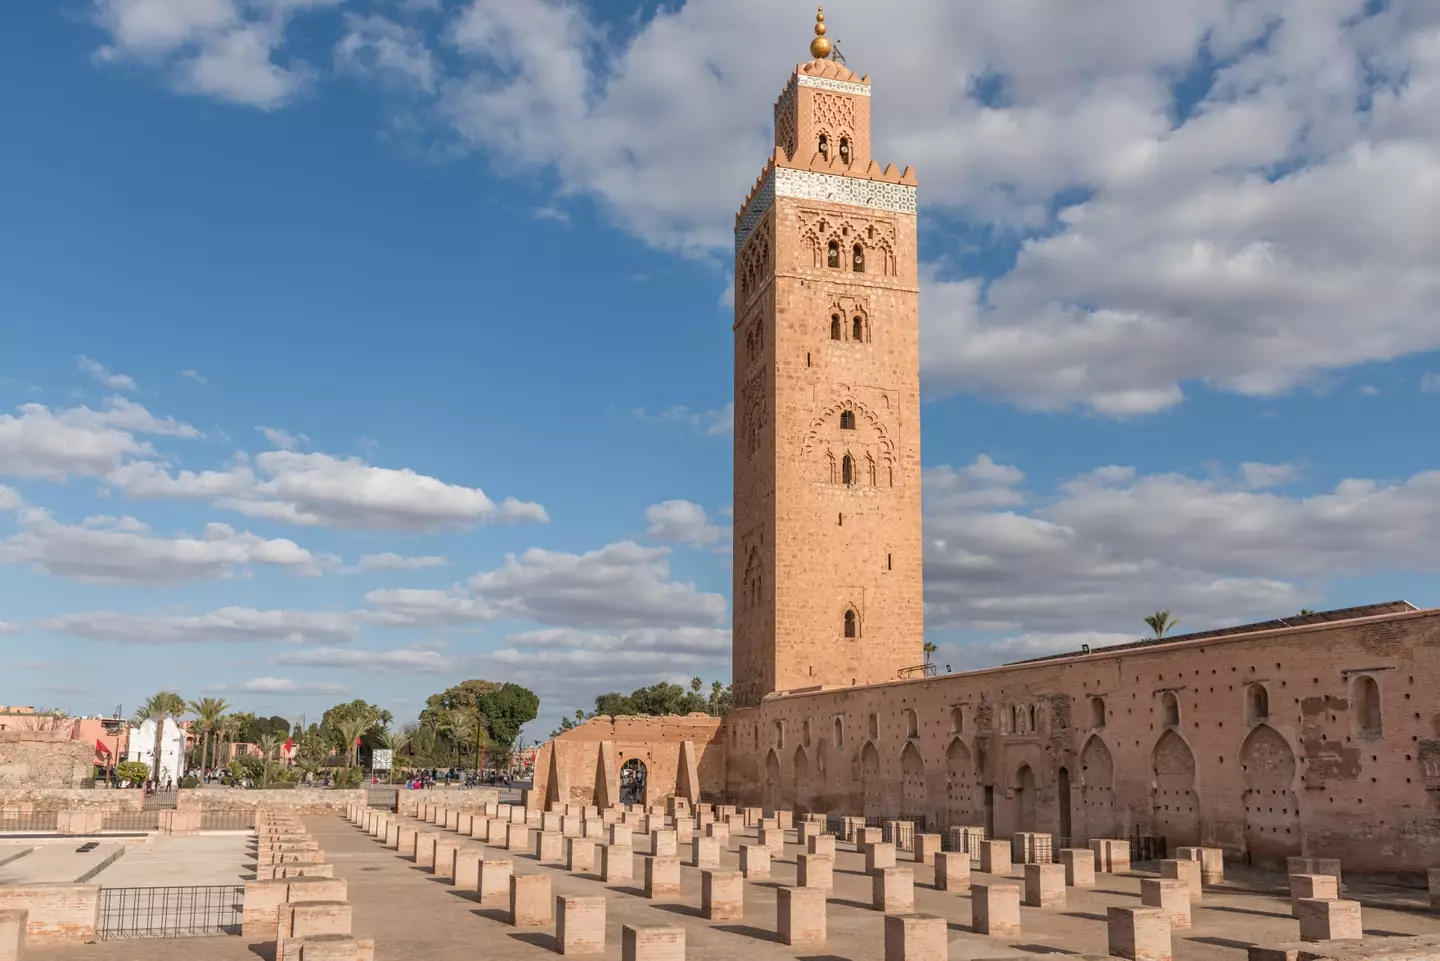 The famous The Koutoubia Mosque in Marrakesh has been damaged in the quake.